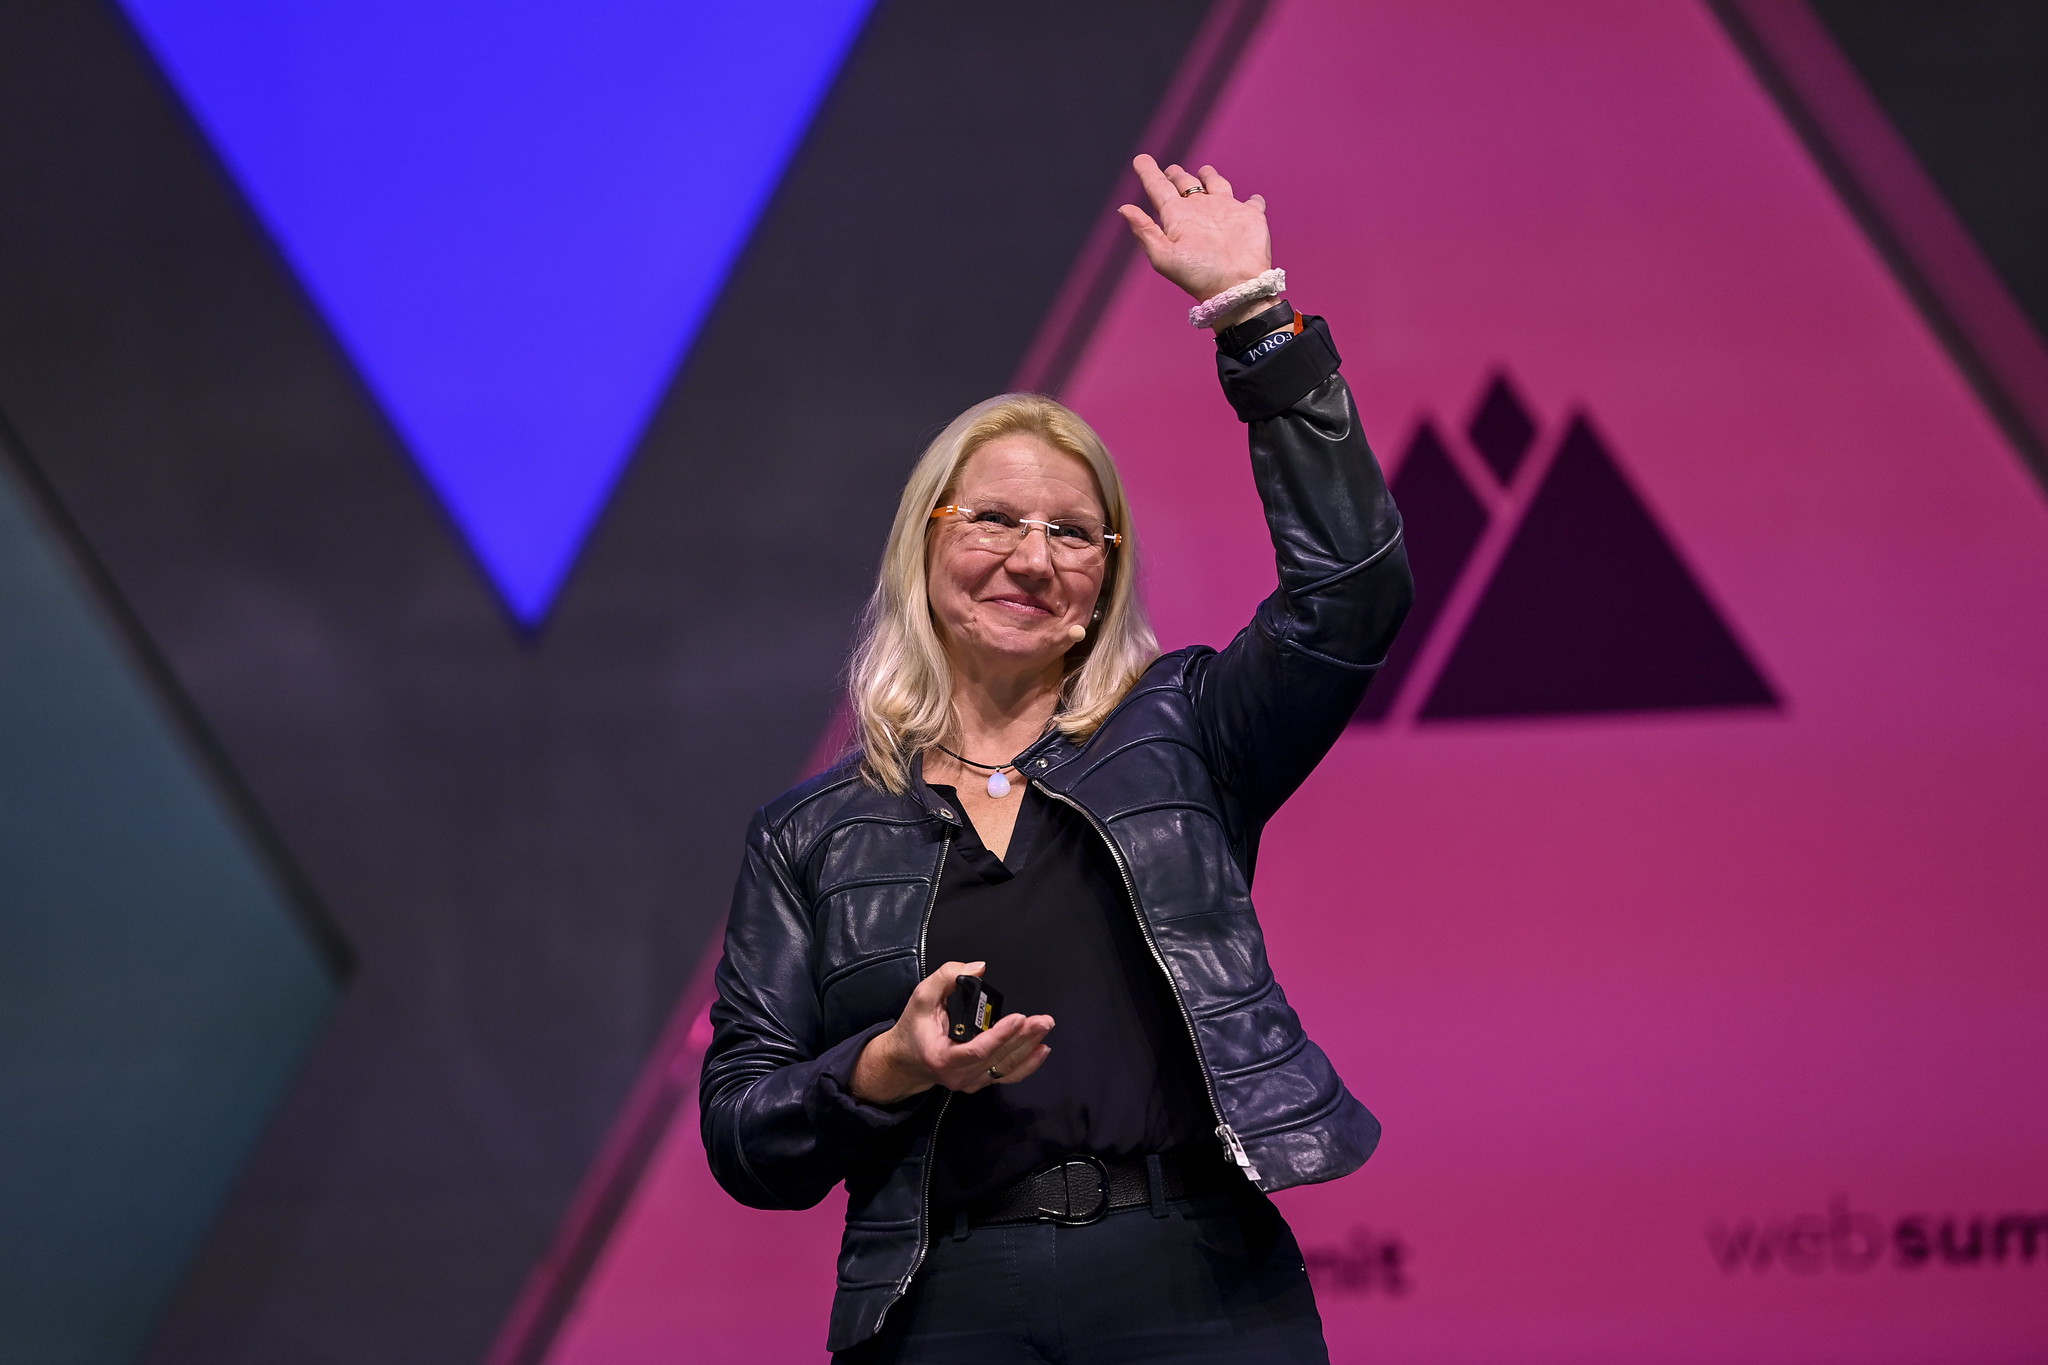 Hanna Hennig, CIO, Siemens, on FullSTK Stage during day two of Web Summit 2021 at the Altice Arena in Lisbon